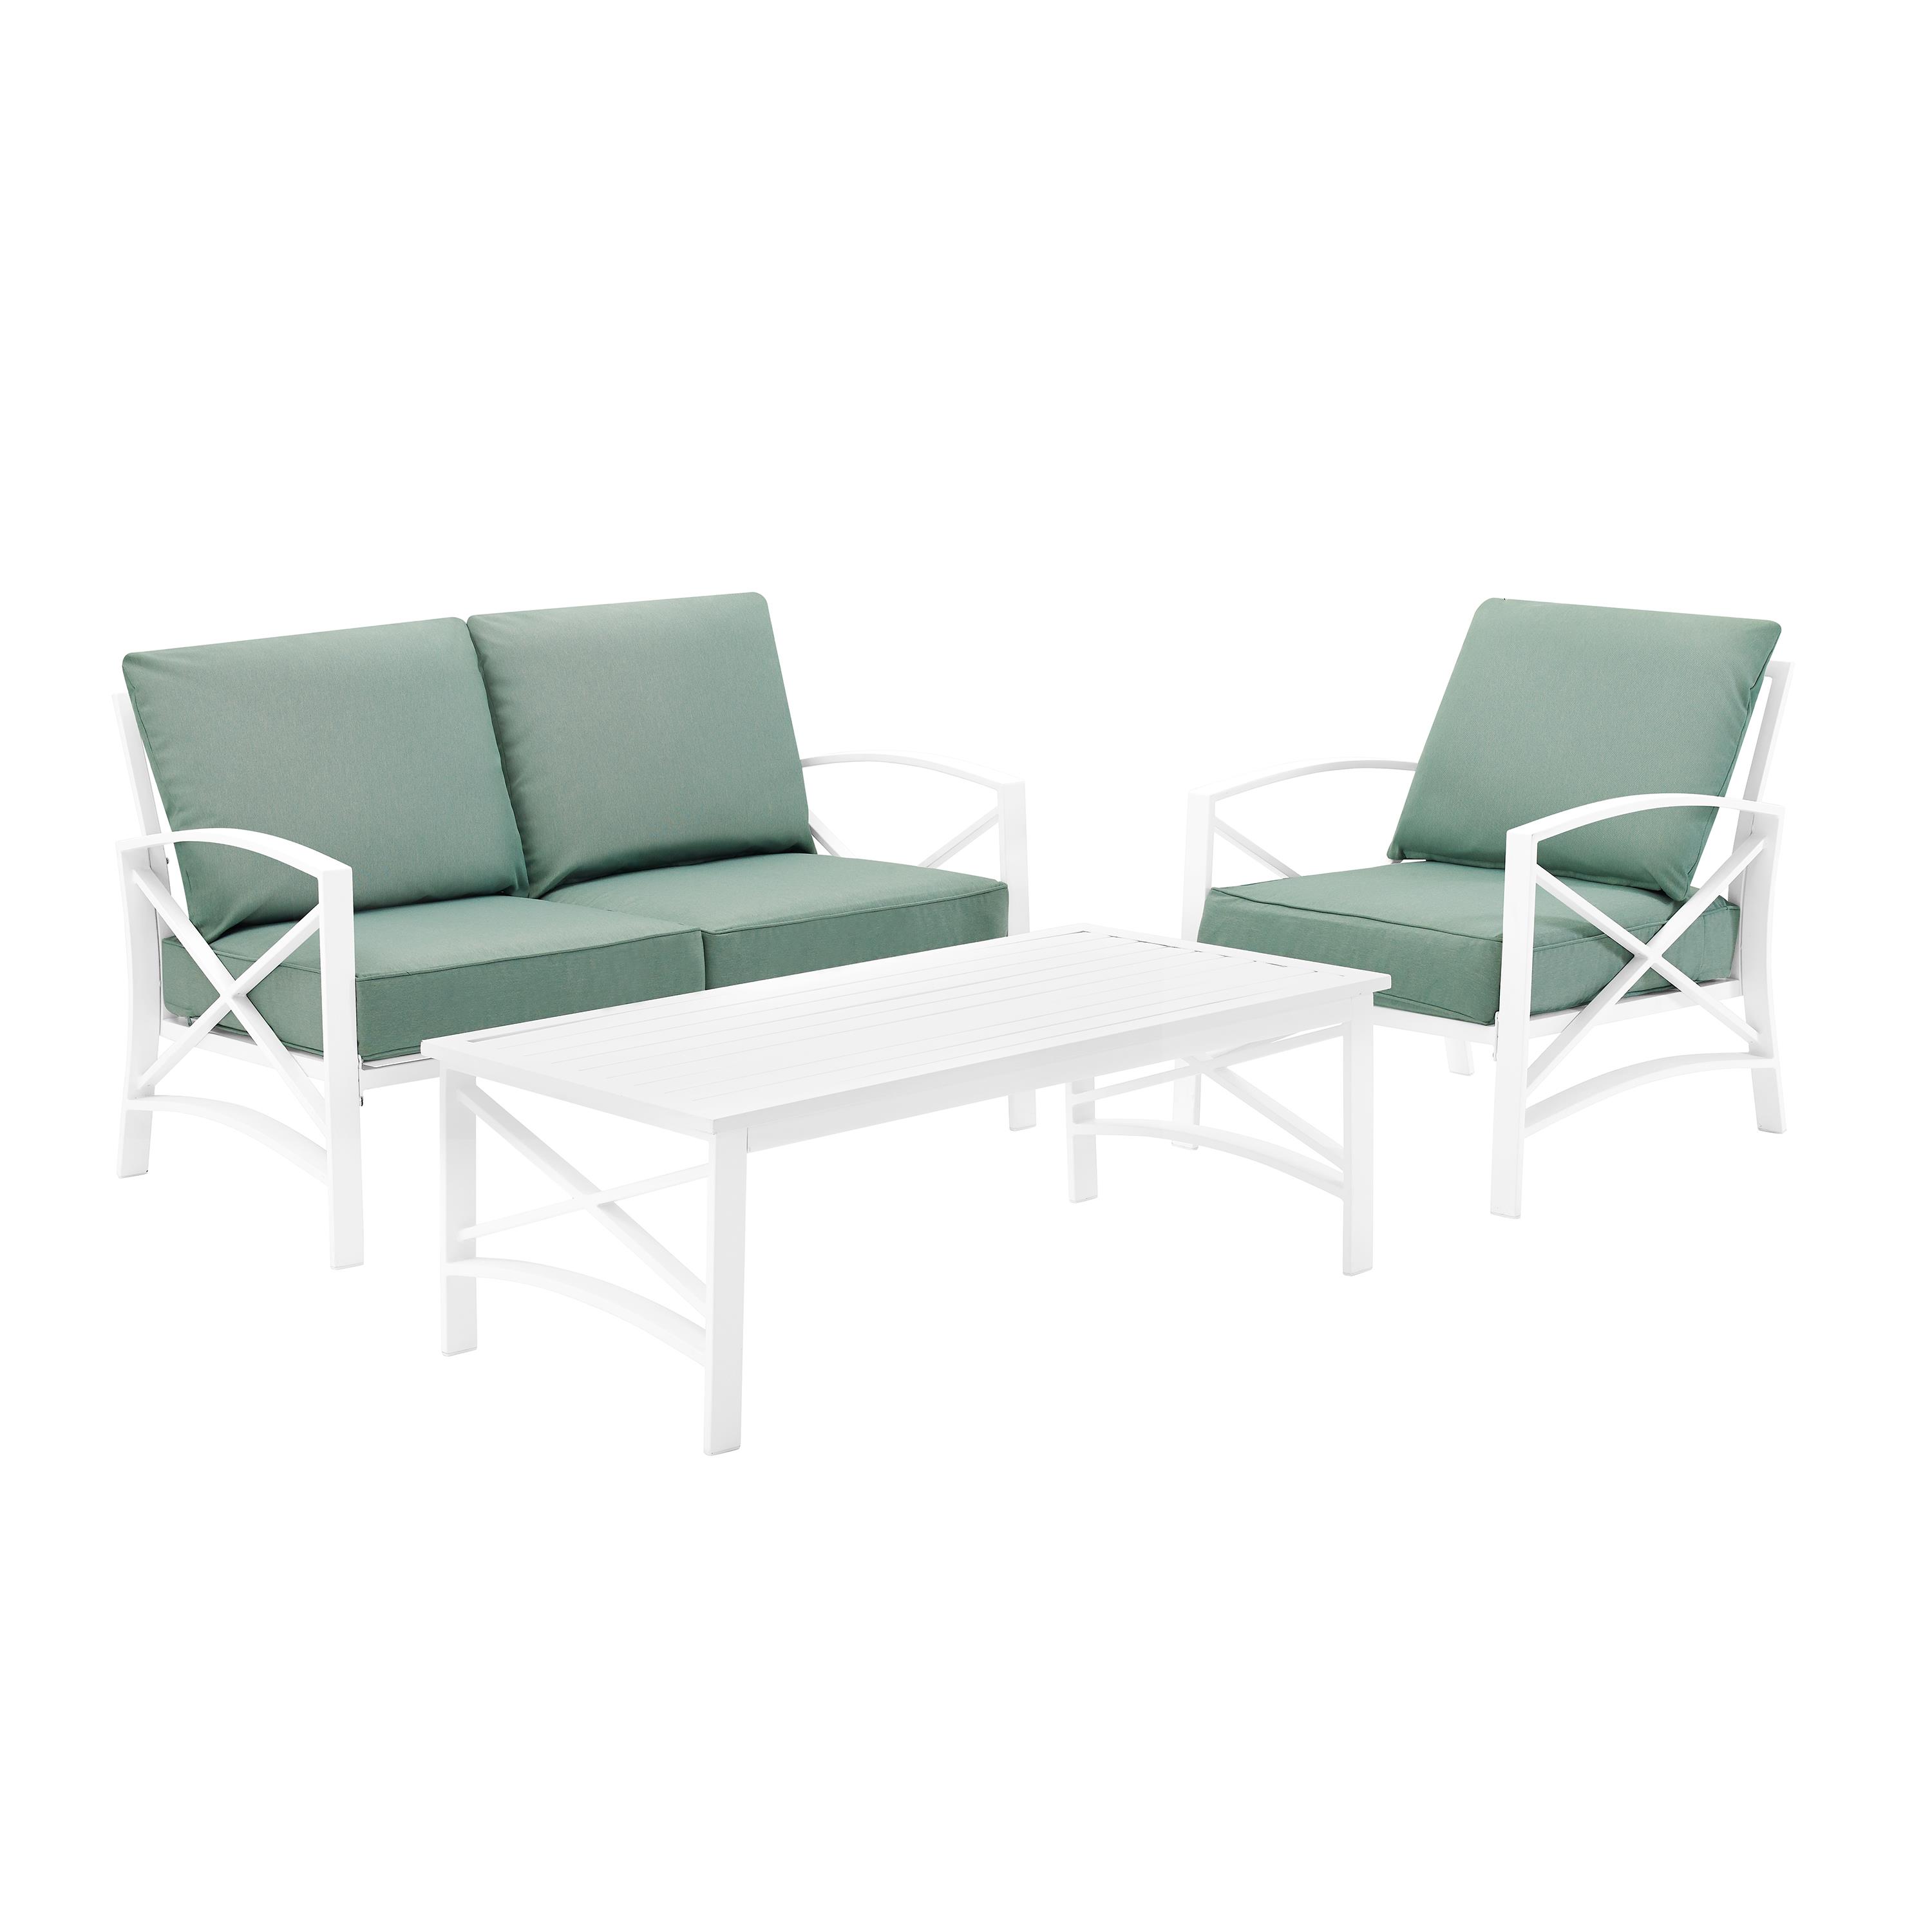 Crosley Kaplan 3 Piece Patio Sofa Set in Mist and White - image 4 of 6